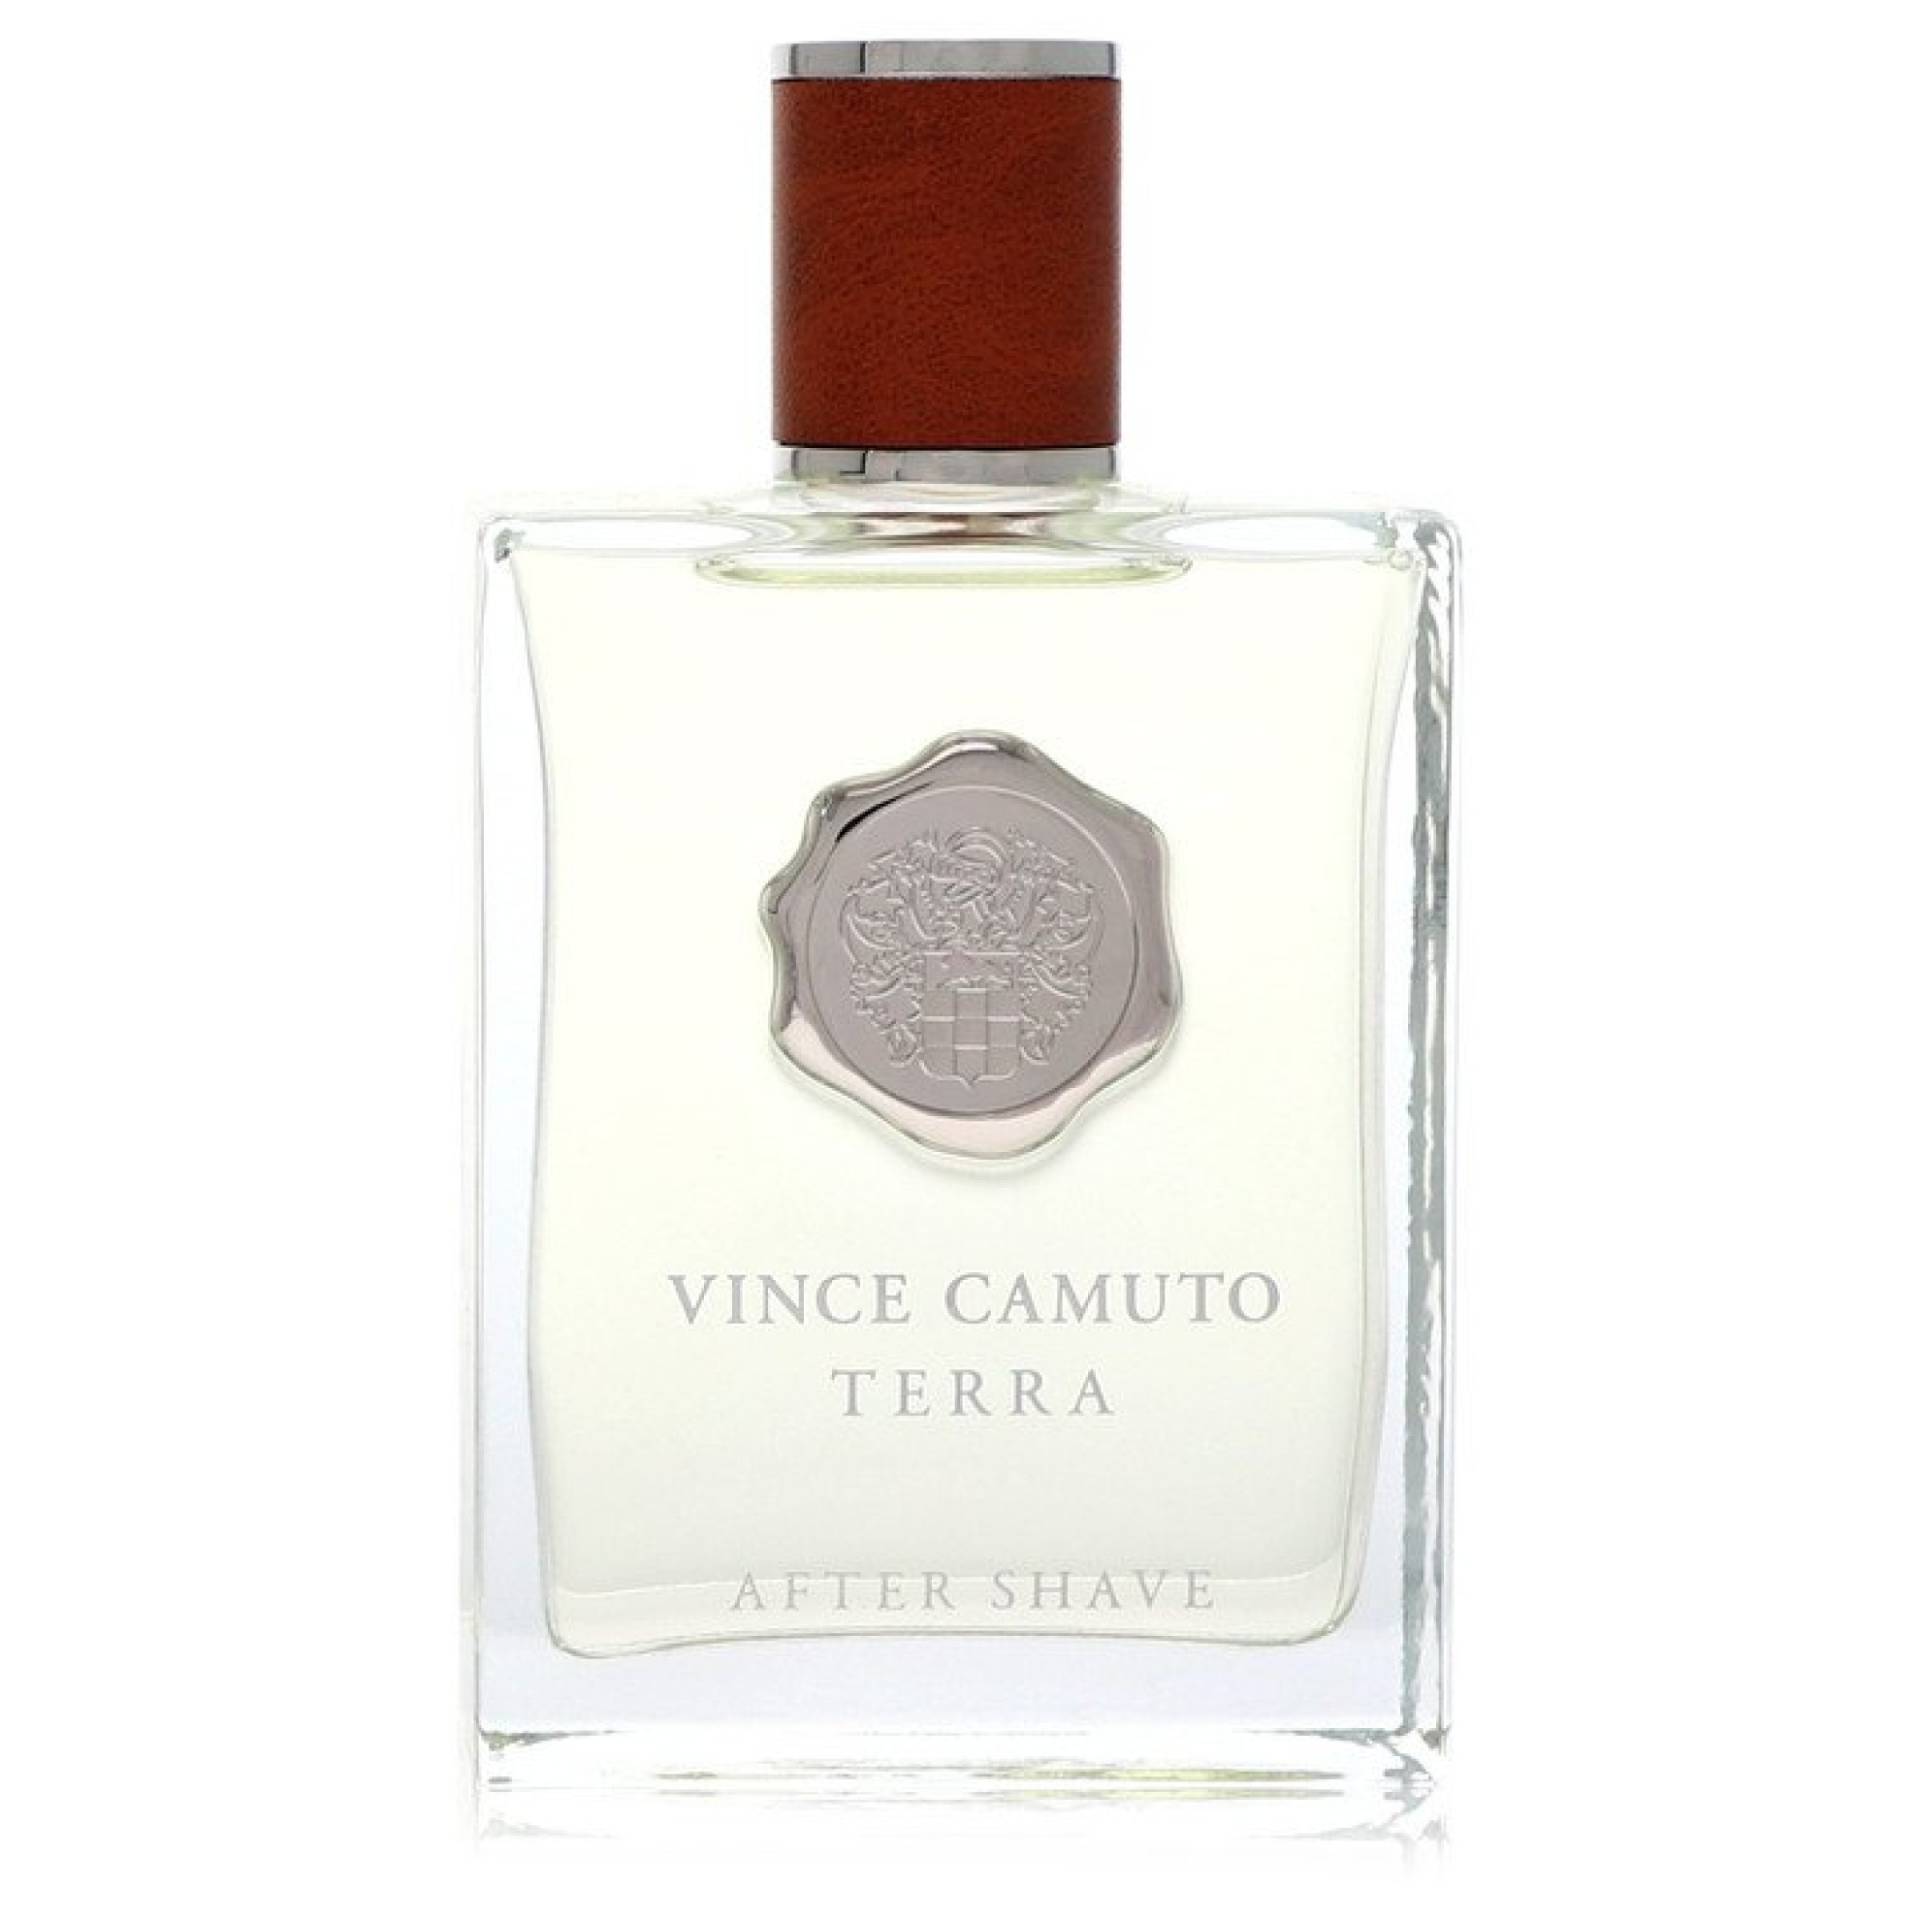 Vince Camuto Terra After Shave (unboxed) 101 ml von Vince Camuto